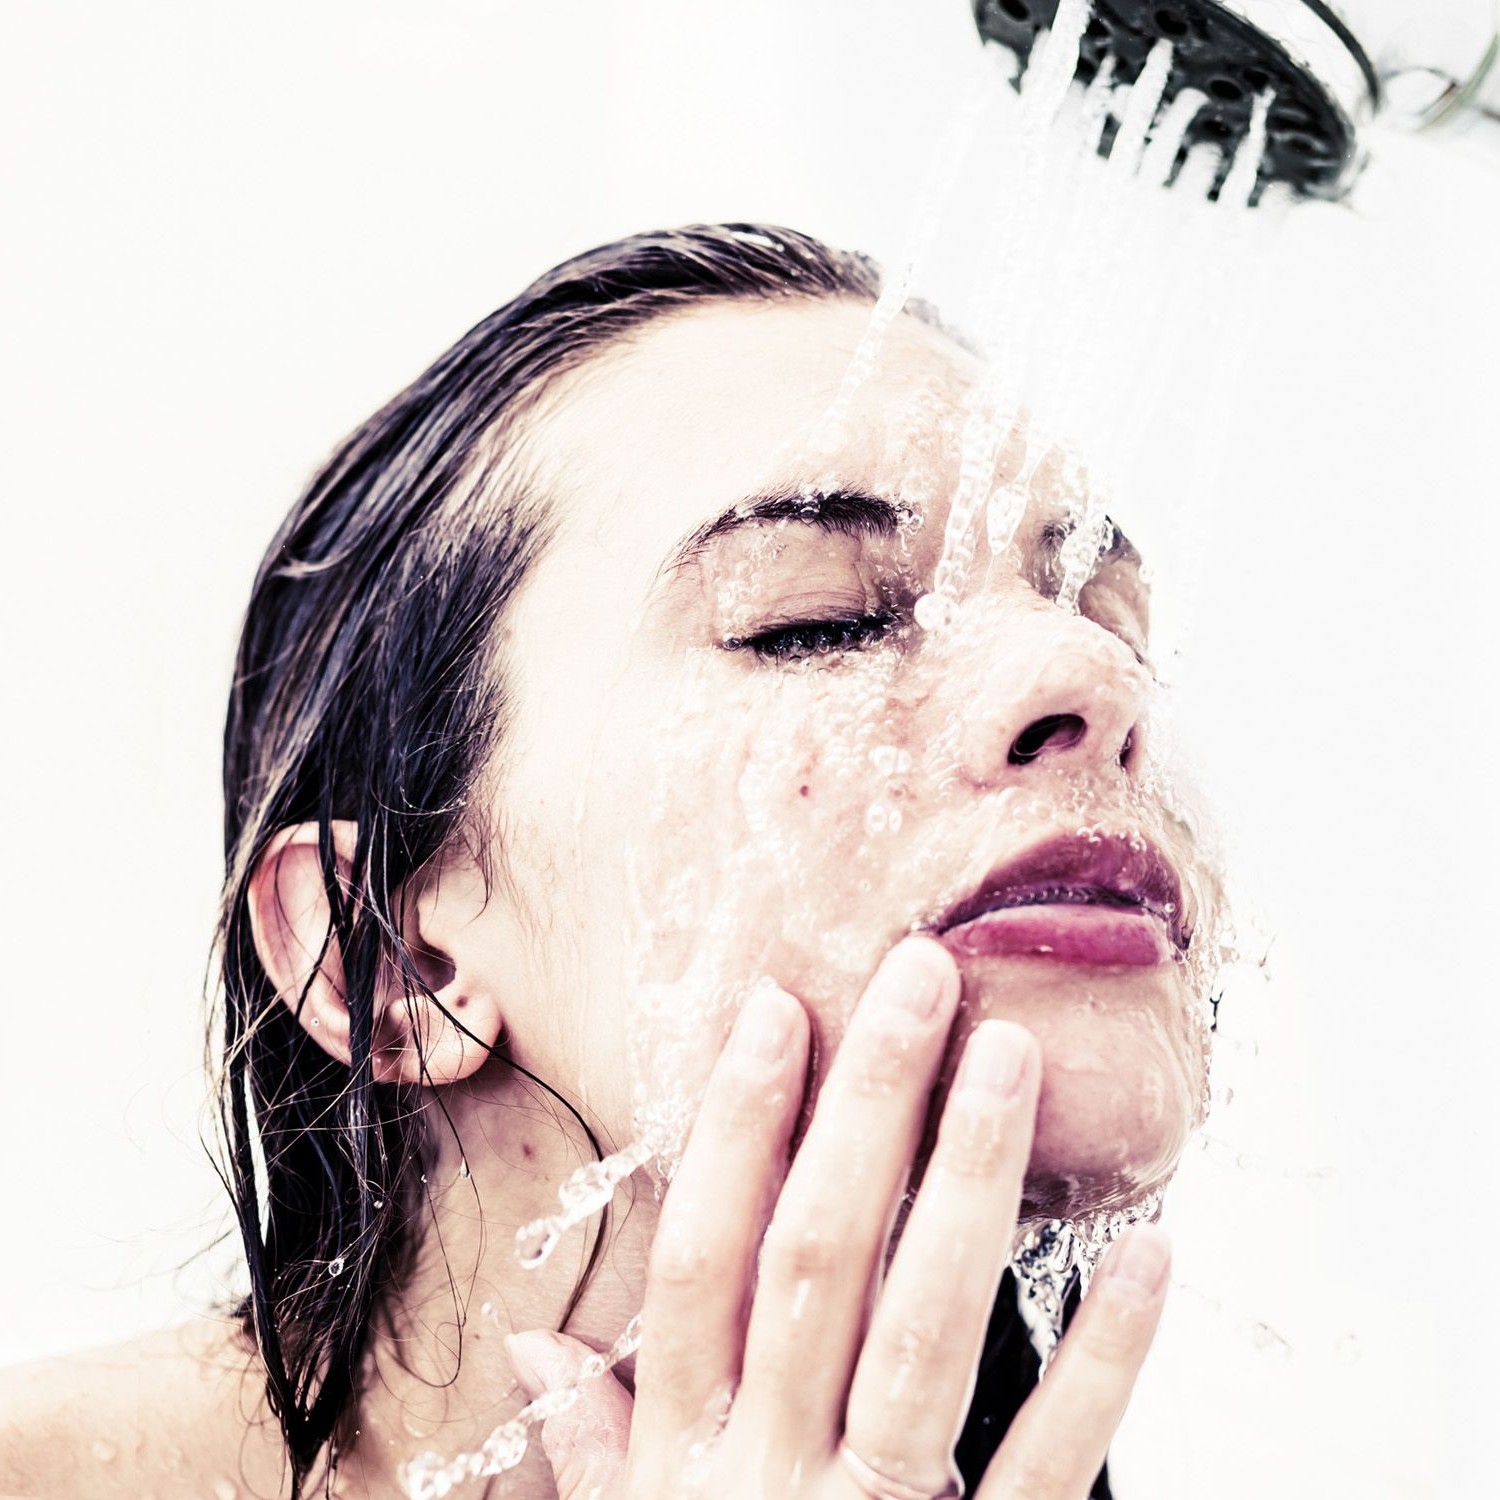 Face Washing Tips - Why You Should Never Wash Your Face in the Shower |  Marie Claire